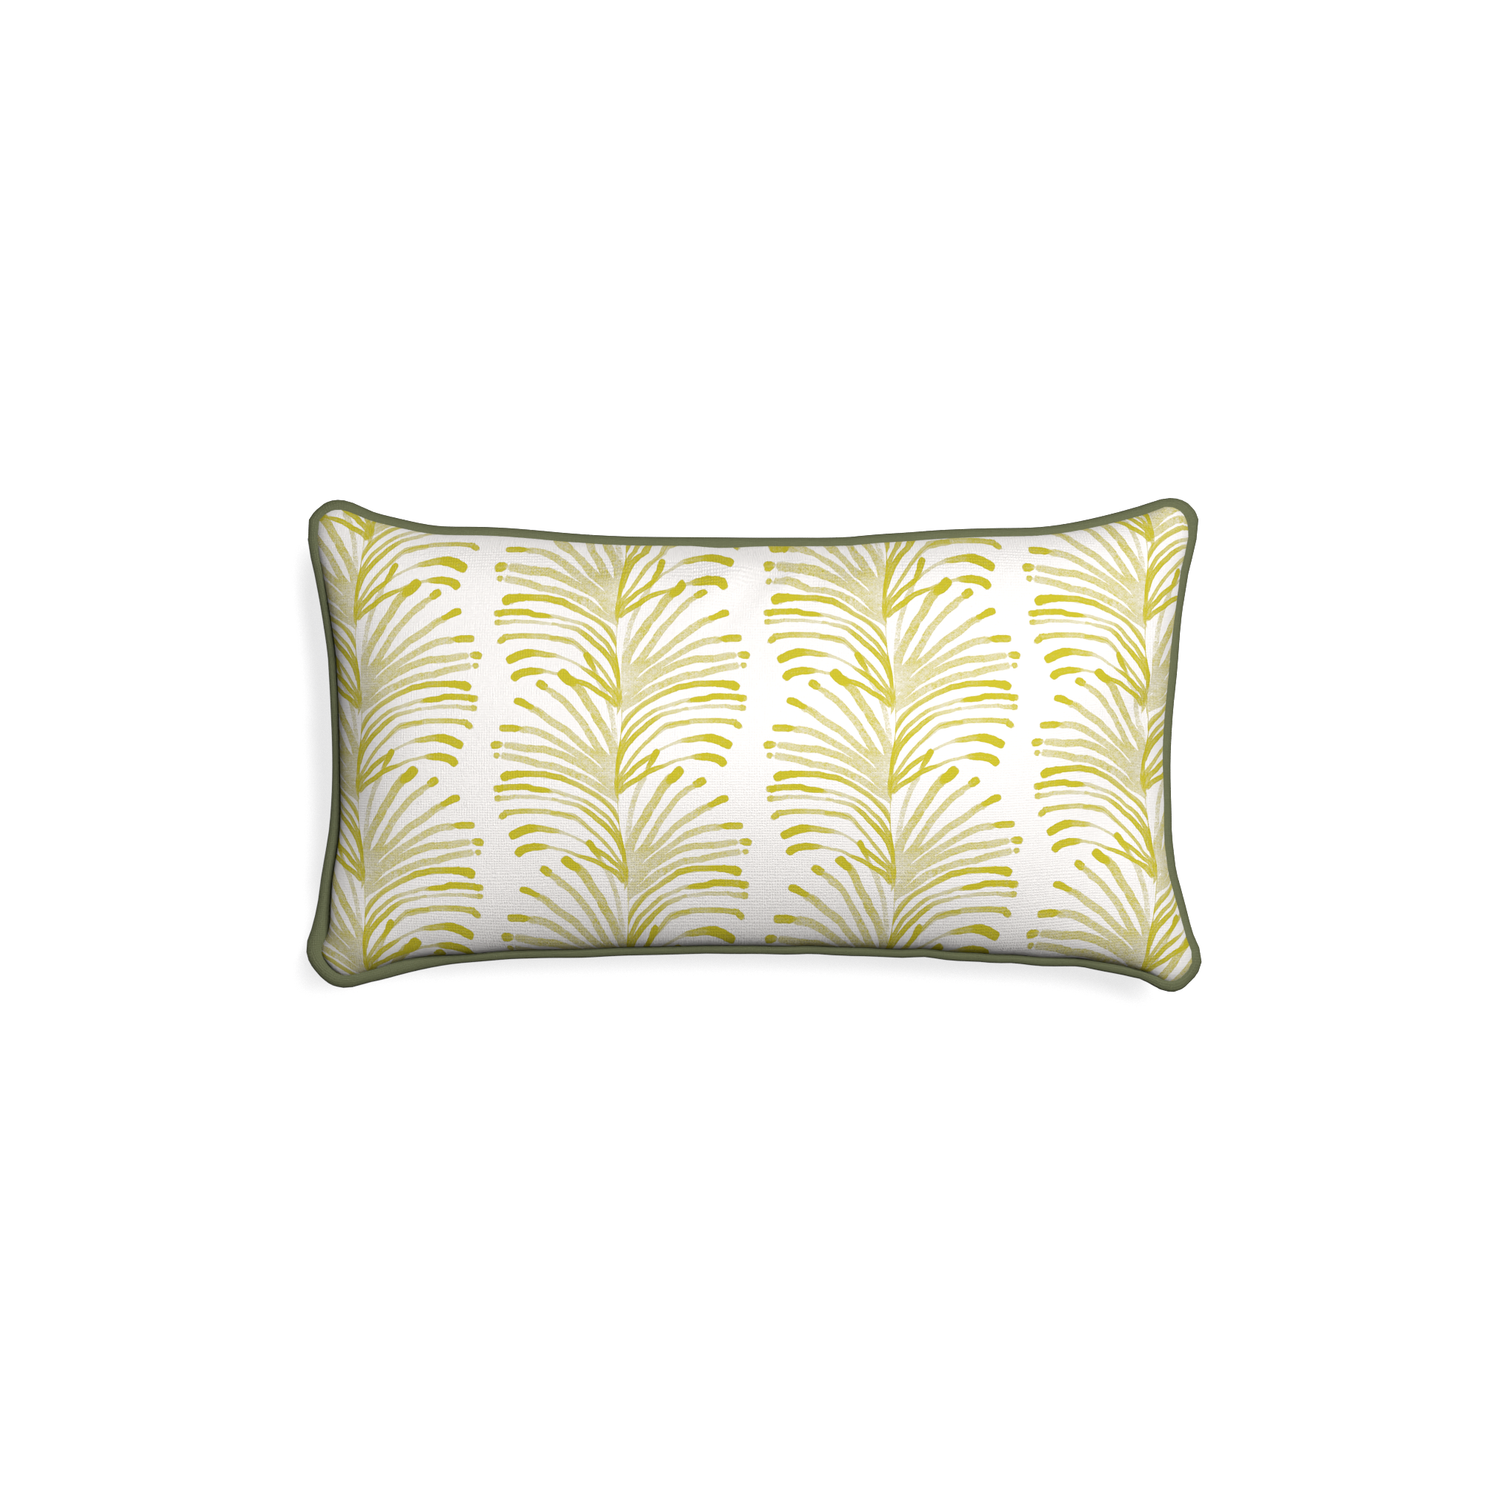 Petite-lumbar emma chartreuse custom yellow stripe chartreusepillow with f piping on white background